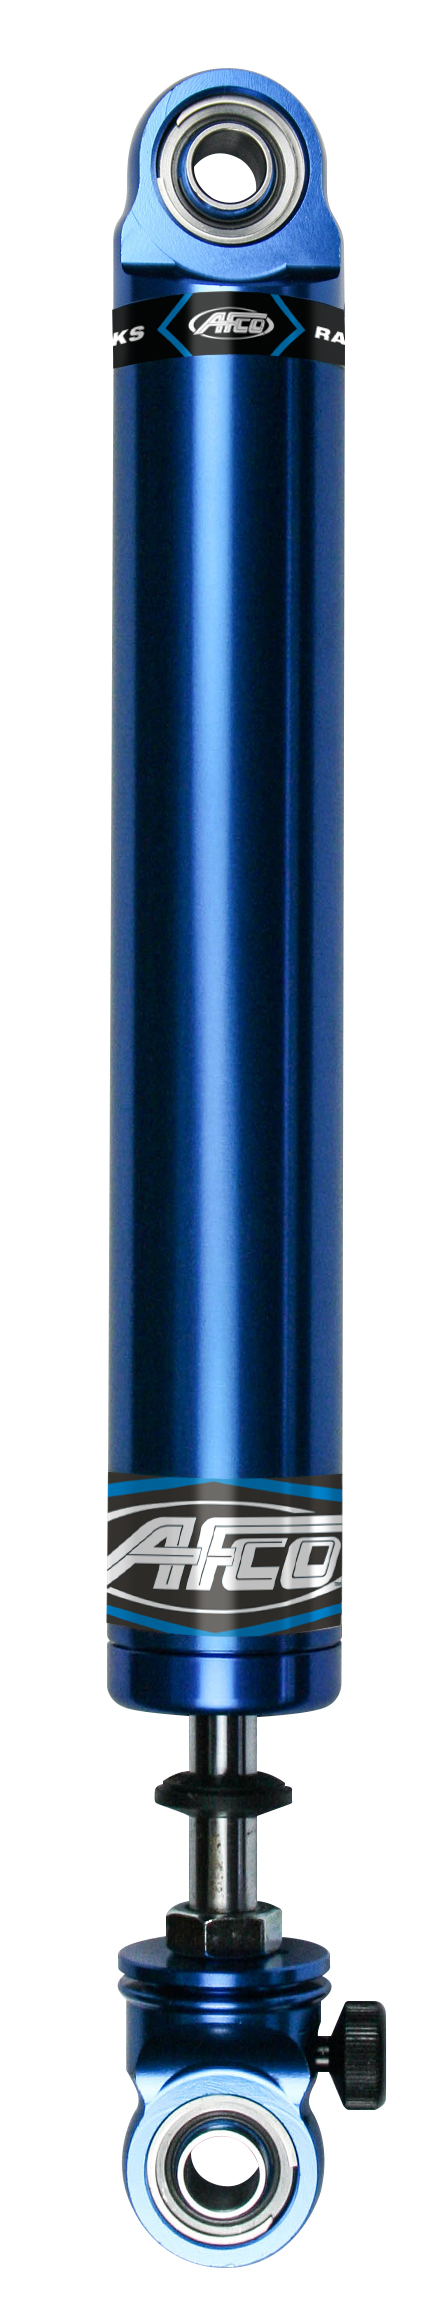 Aluminum Shock Twin Tube 16 Series Small Body 6 Inch Comp 5/Reb 4-8 Smooth